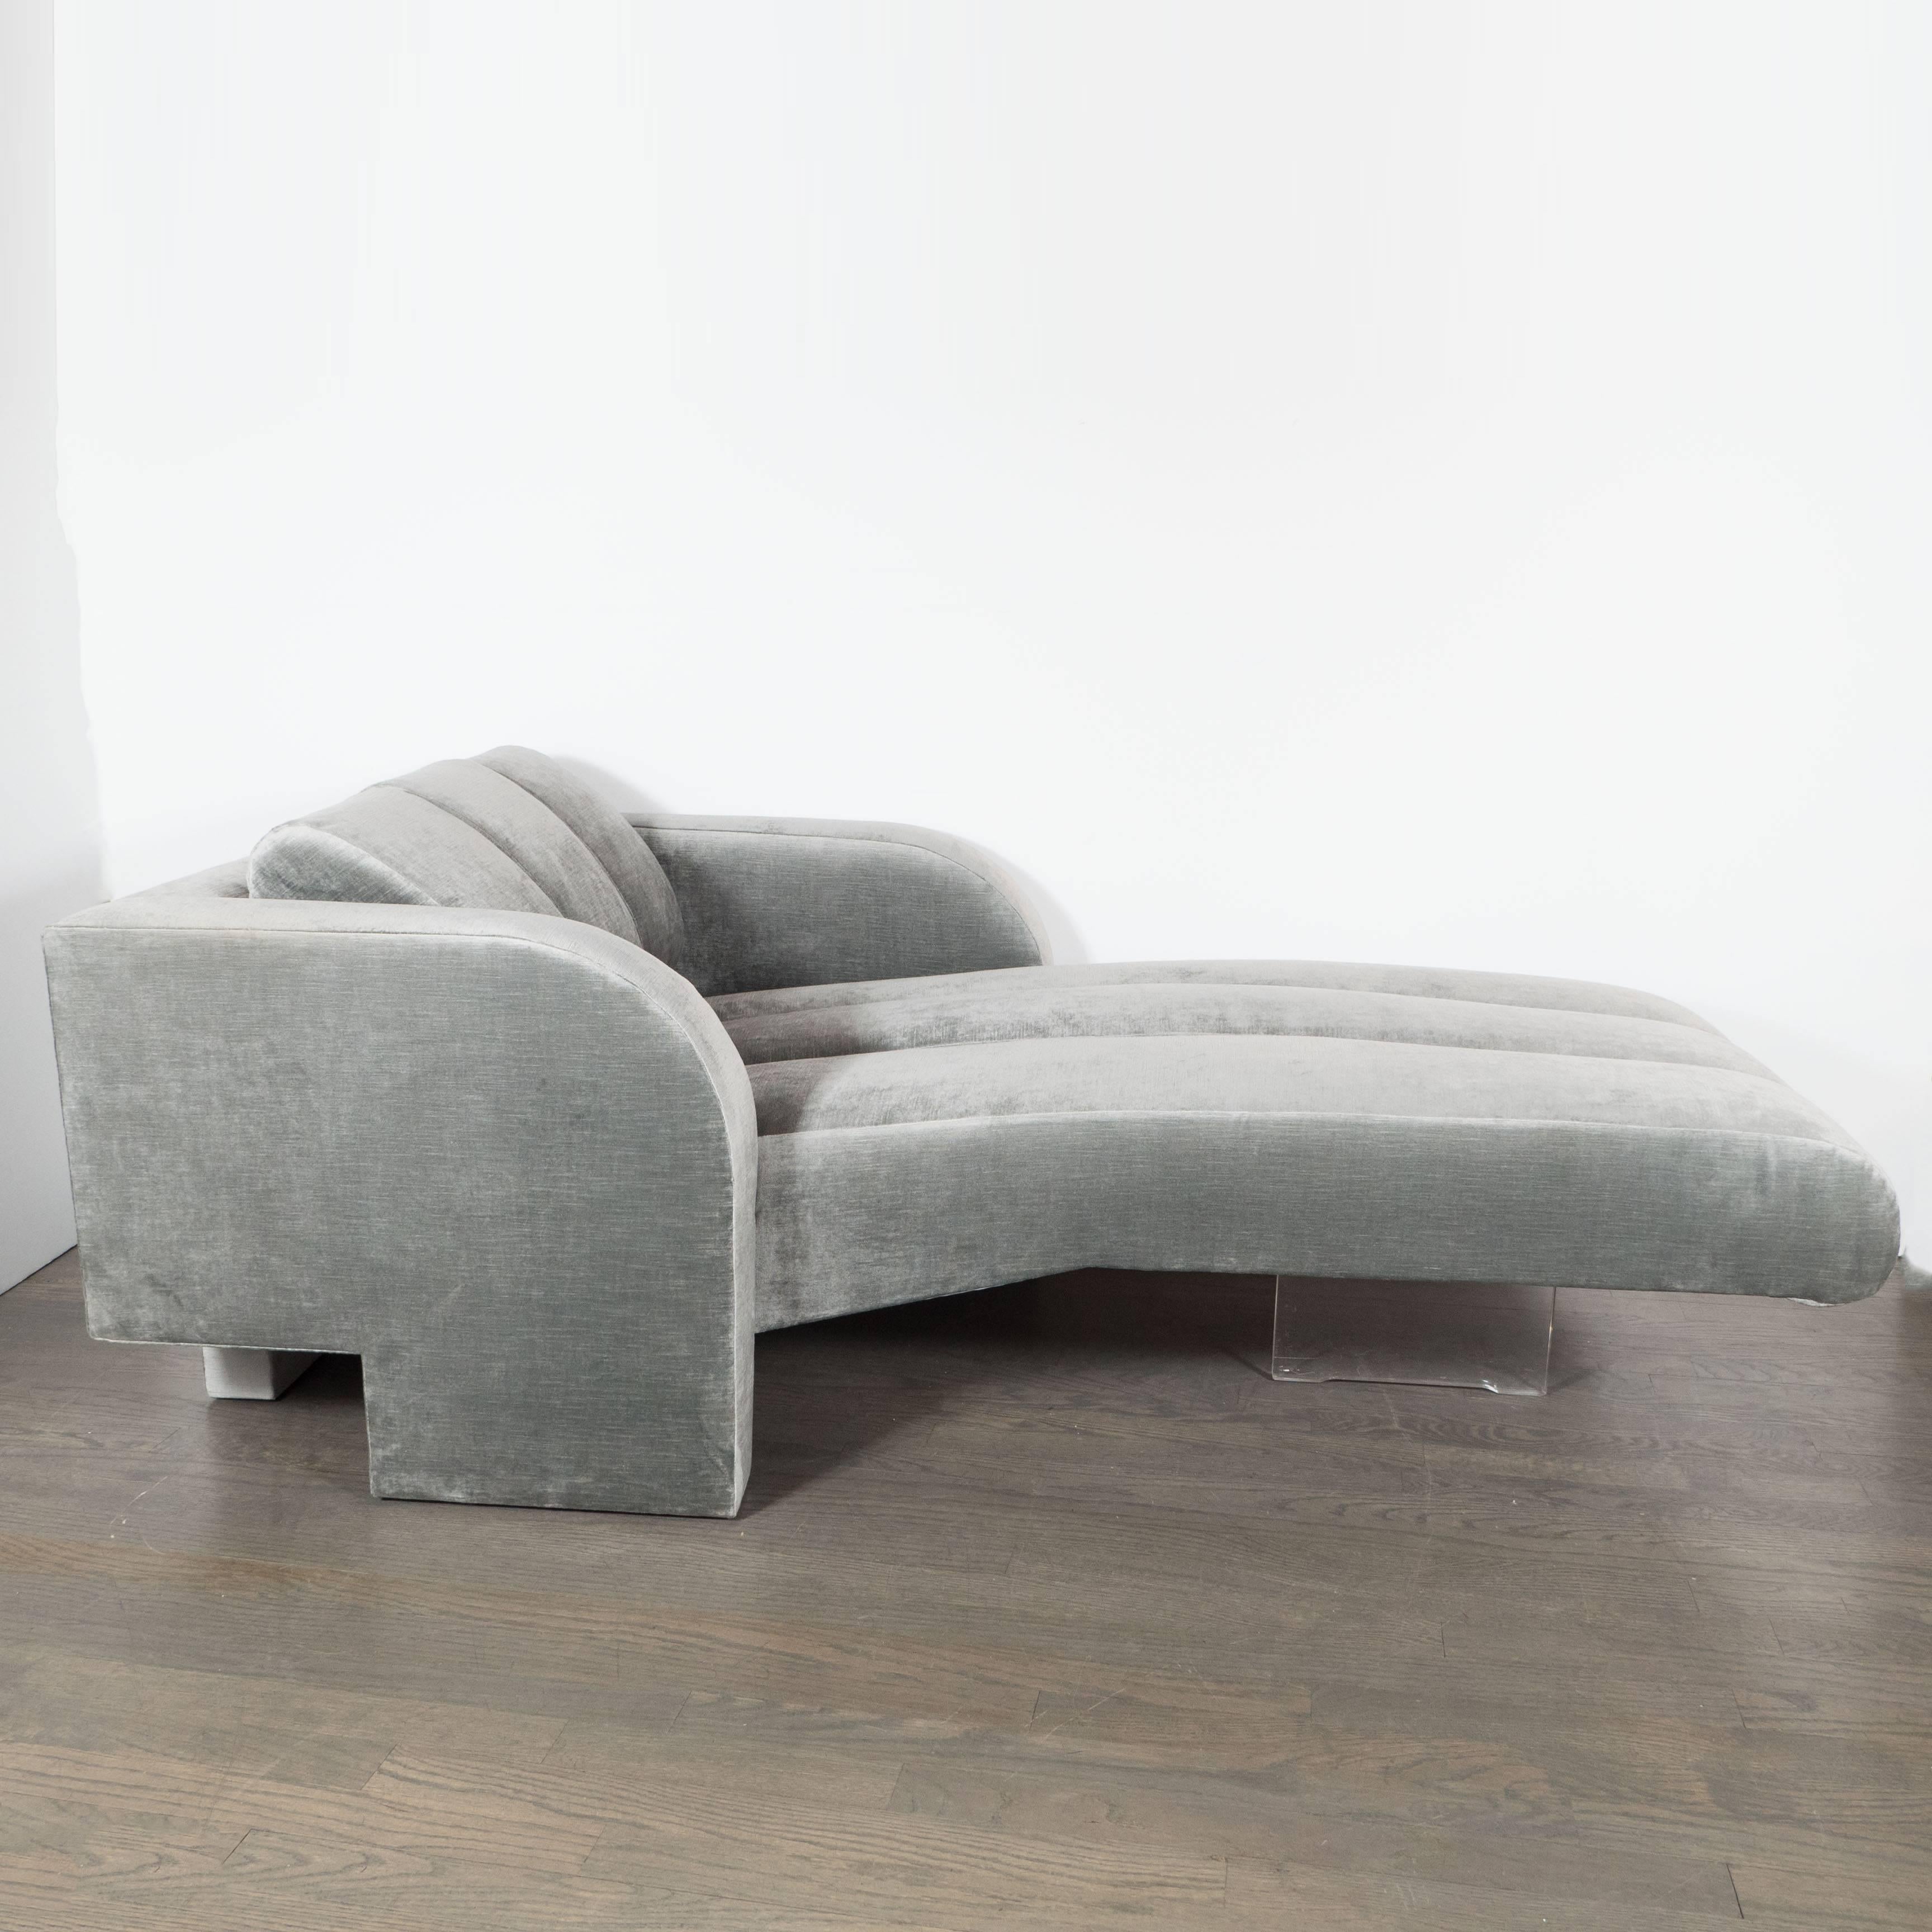 Mid-Century Modern Omnibus Series chaise longue in platinum velvet upholstery by Vladimir Kagan. A square seat-back with wide, curved arms support a three-banded pillow and seat. Newly upholstered in a luxe smoked platinum gray velvet fabric. A